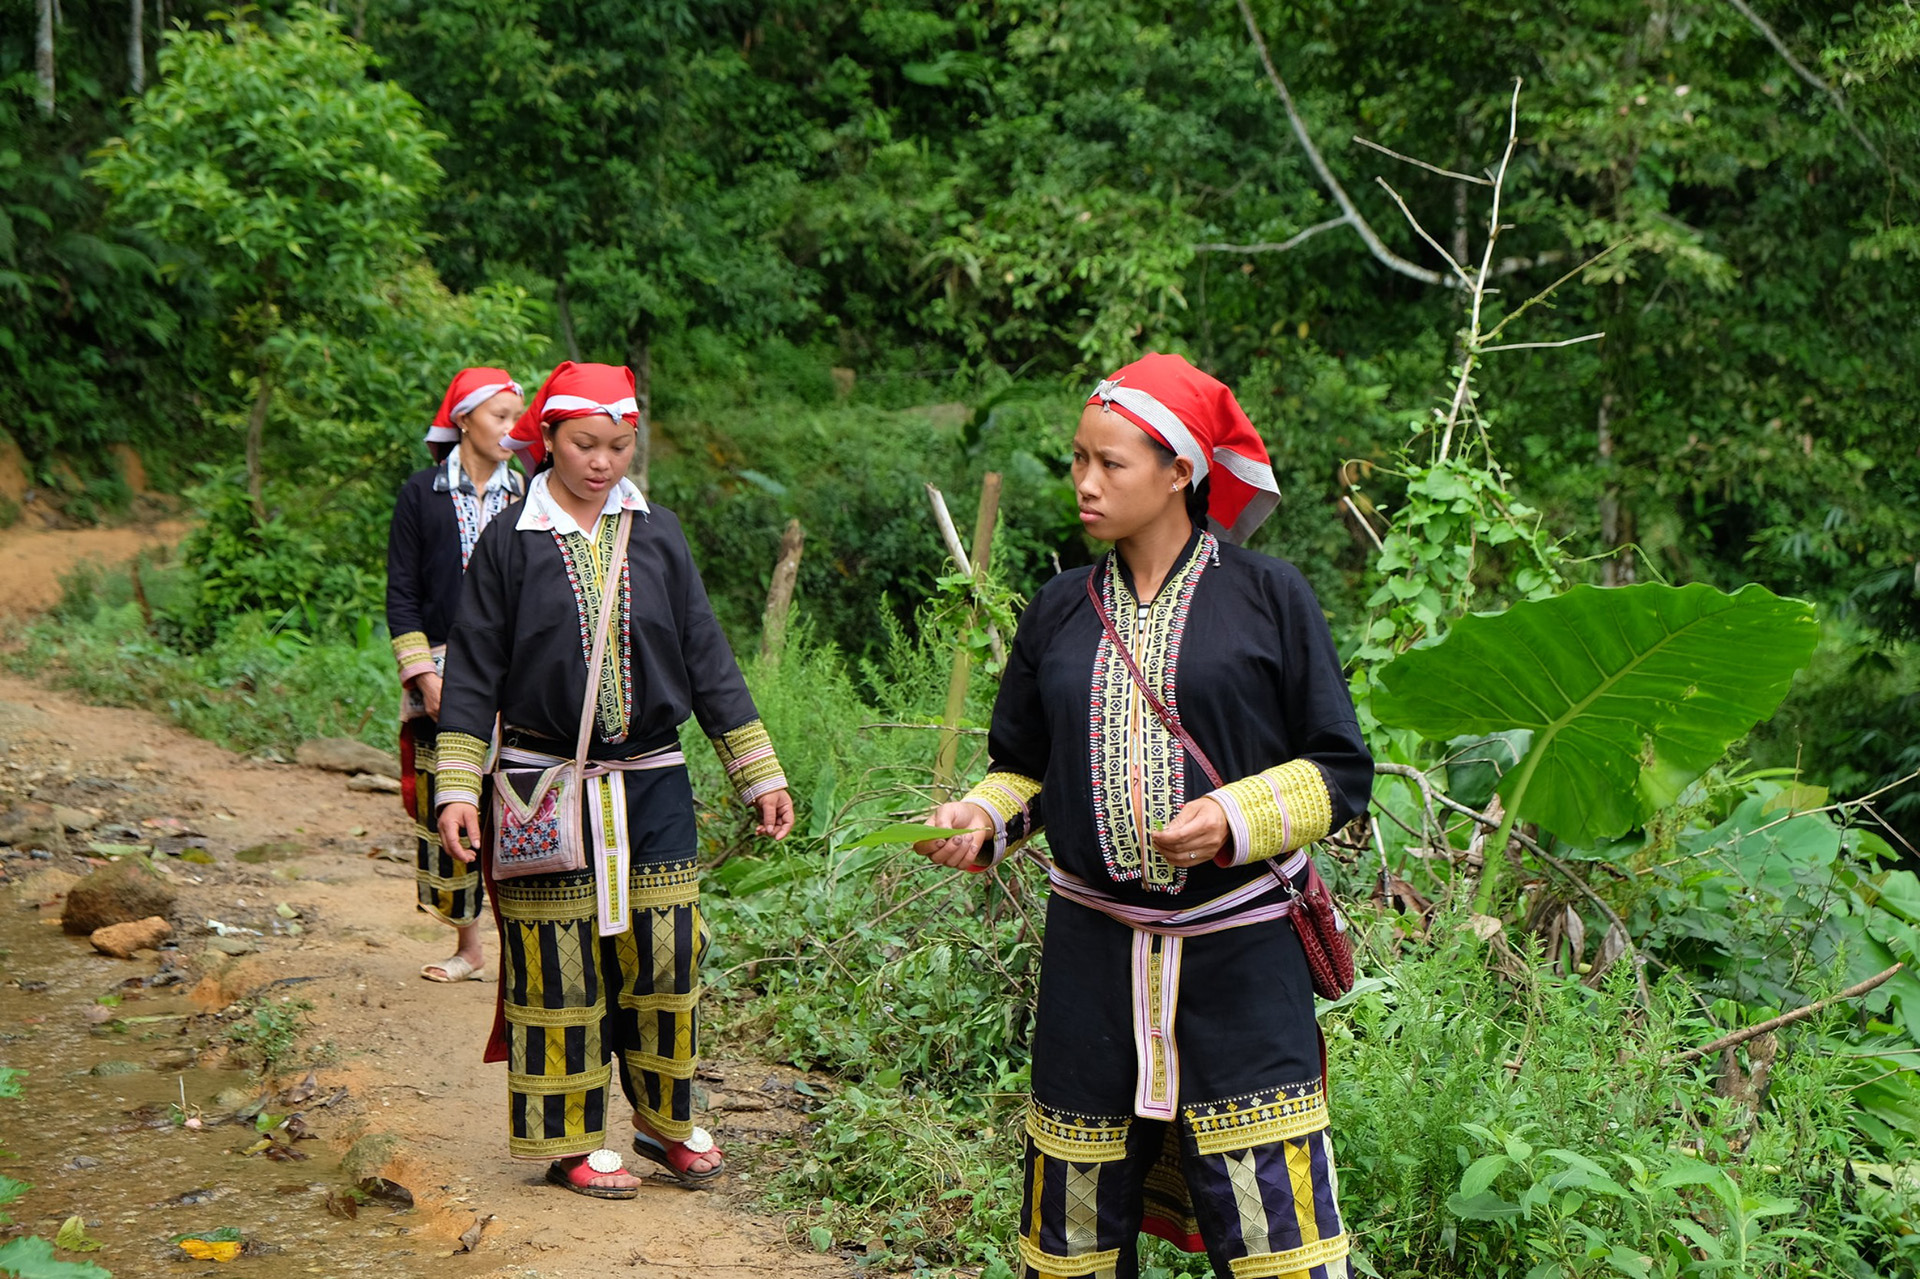 Members of the ethnic Dao minority in Chu Kan Ho village, Tong Sanh Commune, Lao Cai Province going into the forest to pick and gather medicinal herbs and plants. Photo credit: Leona Liu/UN-REDD Programme